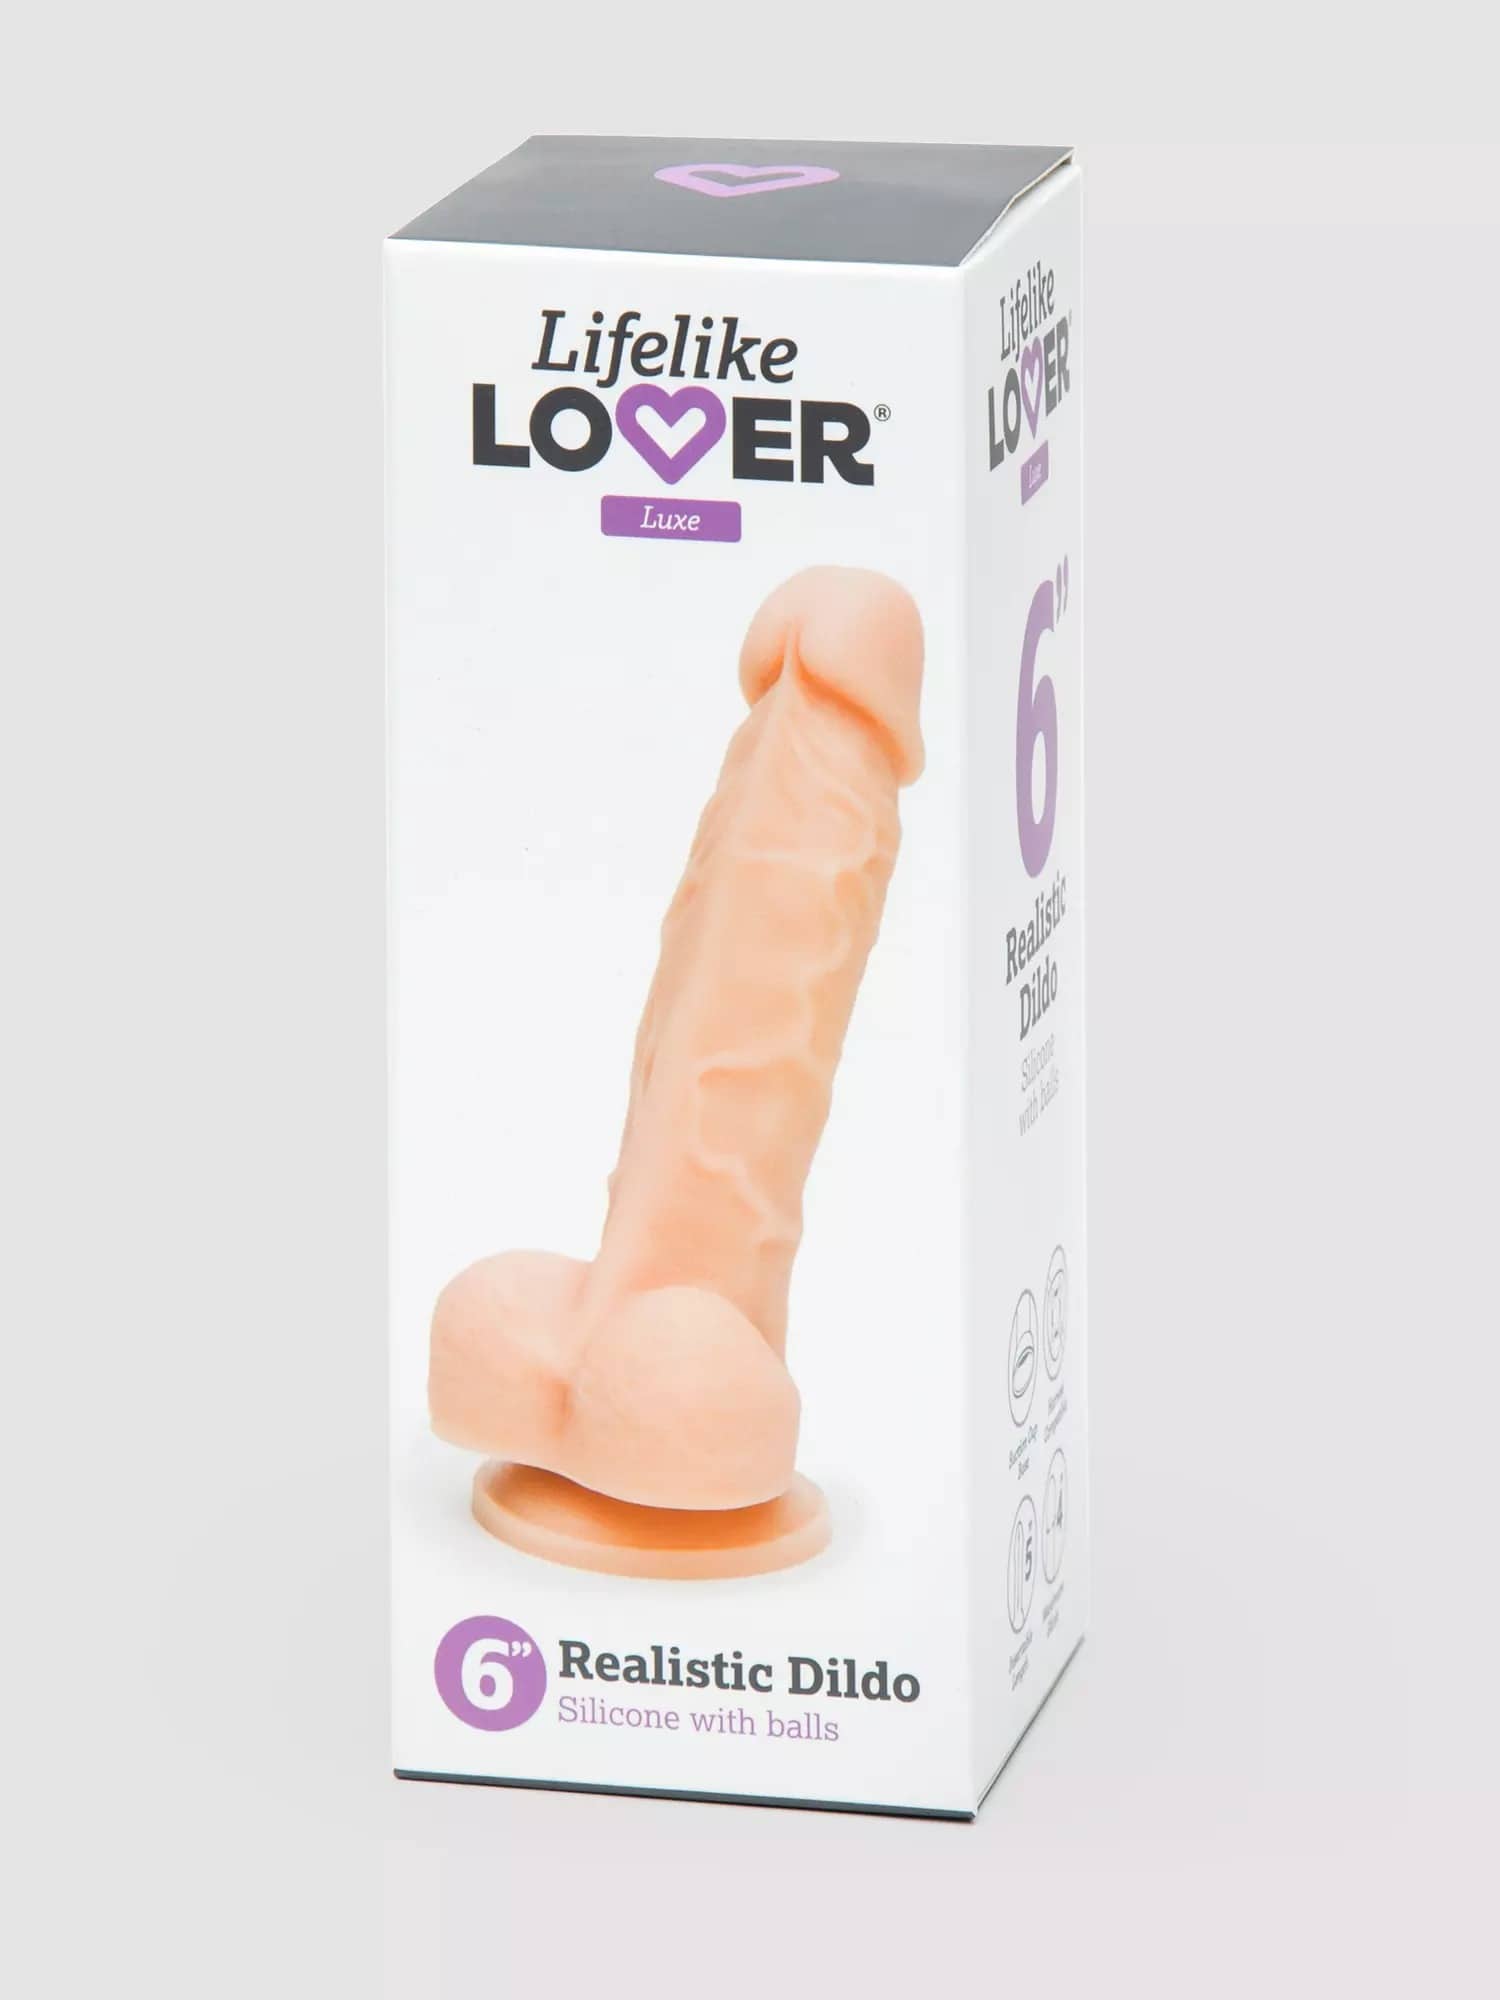 Lifelike Lover Luxe Realistic Silicone Dildo 6 Inch. Slide 6